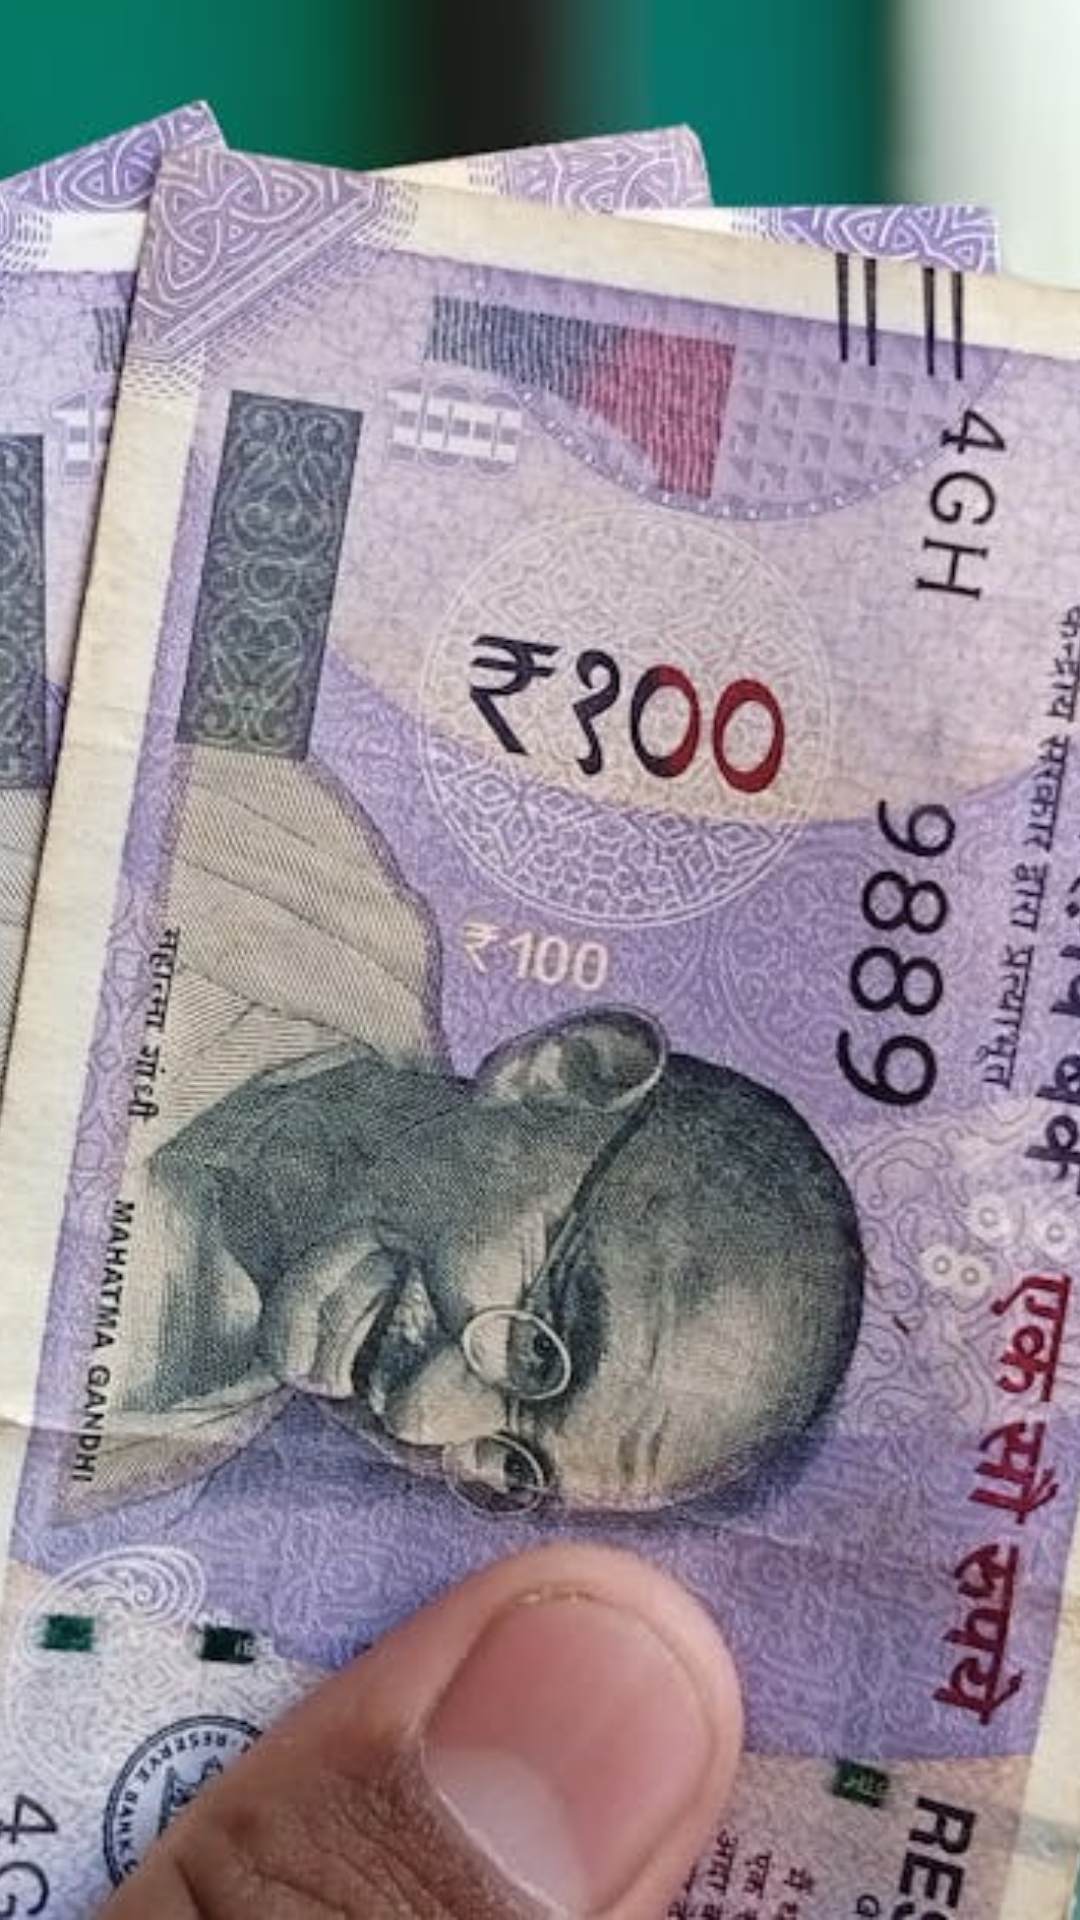 how many languages are written on 100 rupee note, What are the 17 languages on Indian currency, How many languages are written in the back of a 500 rupee note, What is printed on a 100 rupee note, Which languages are printed on the Indian 100 rupees note, शंभर रुपयांची नोट, 100 रुपये, मराठी बातम्या, बातम्या 